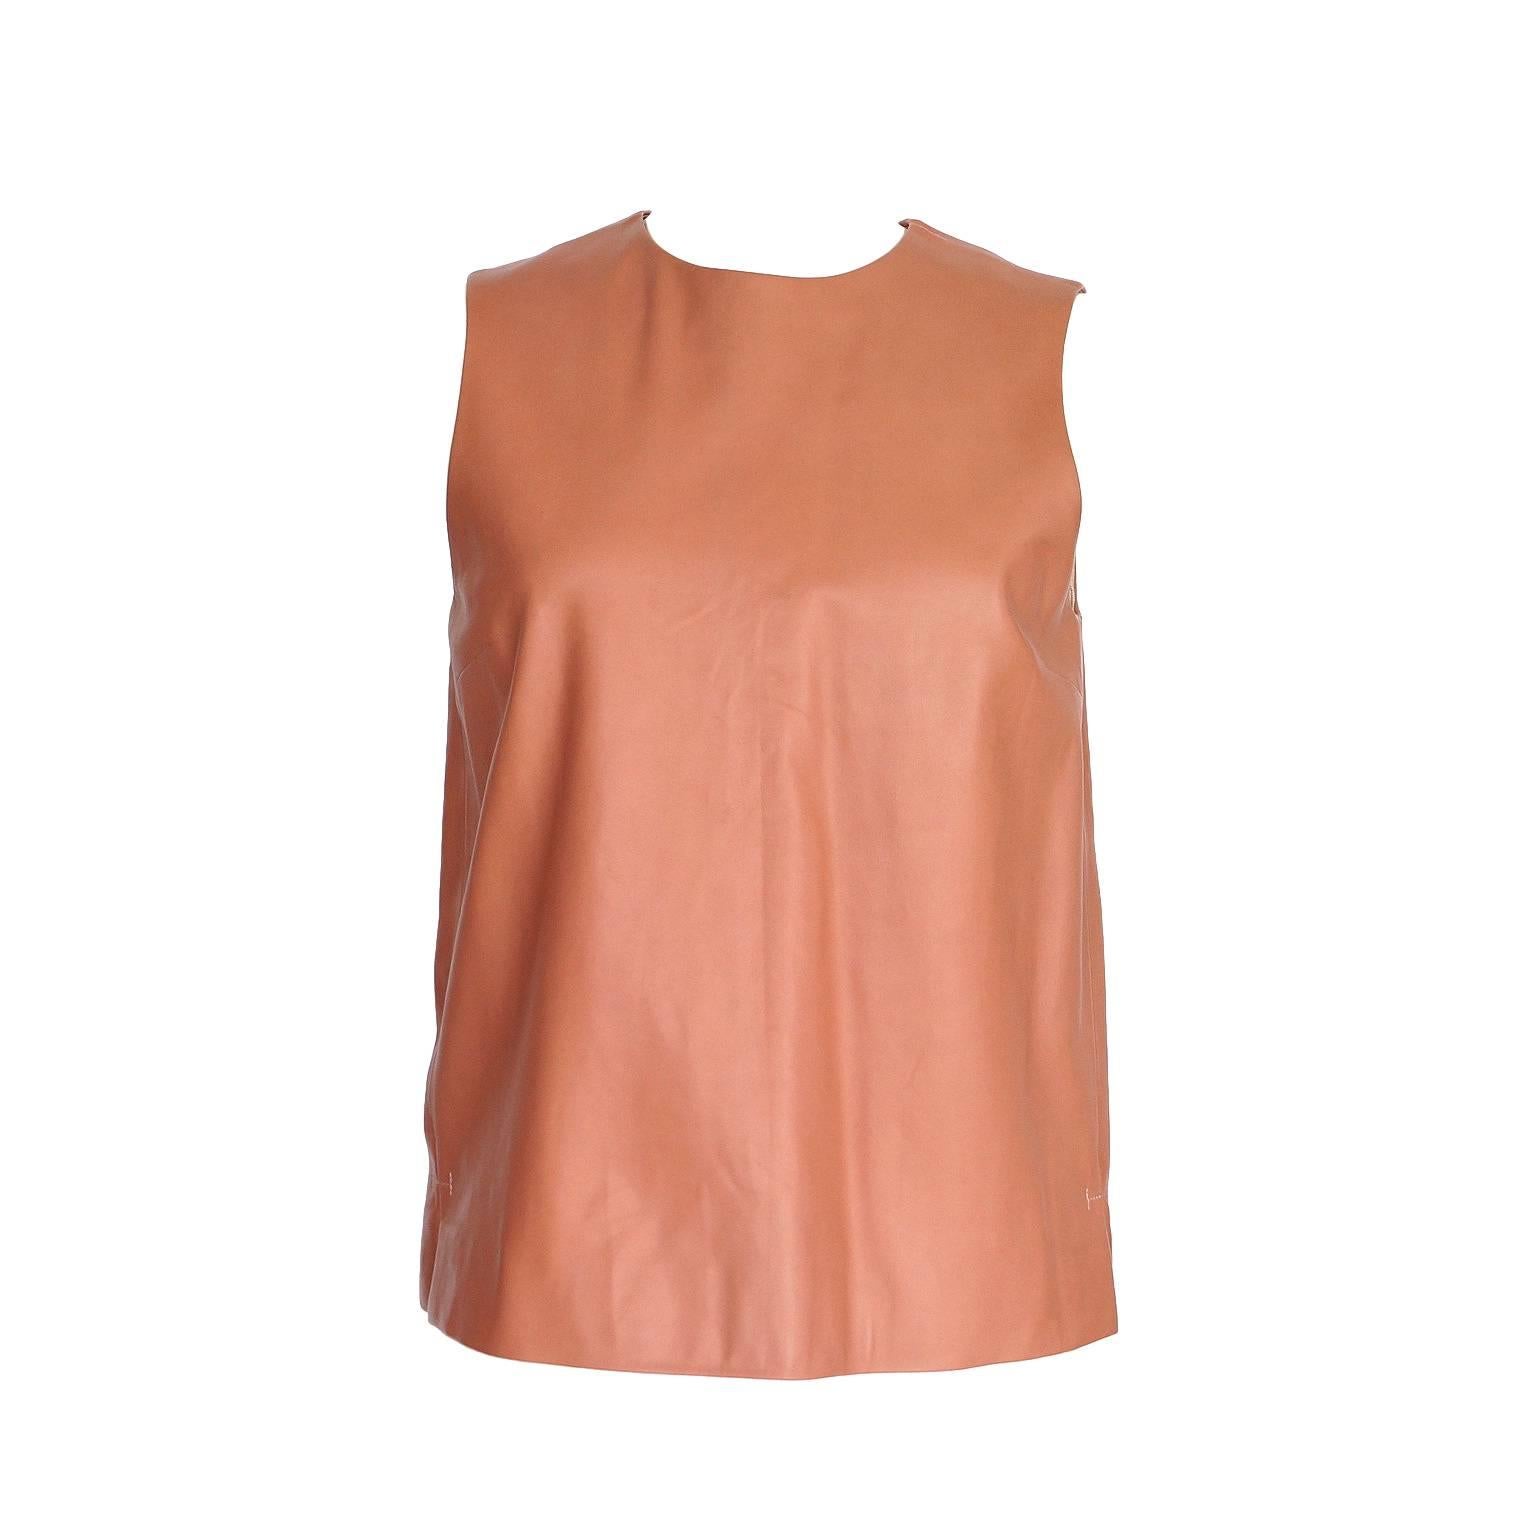 The Row Top Dusty Rose Pink Leather Sleek Perfection  6 nwt